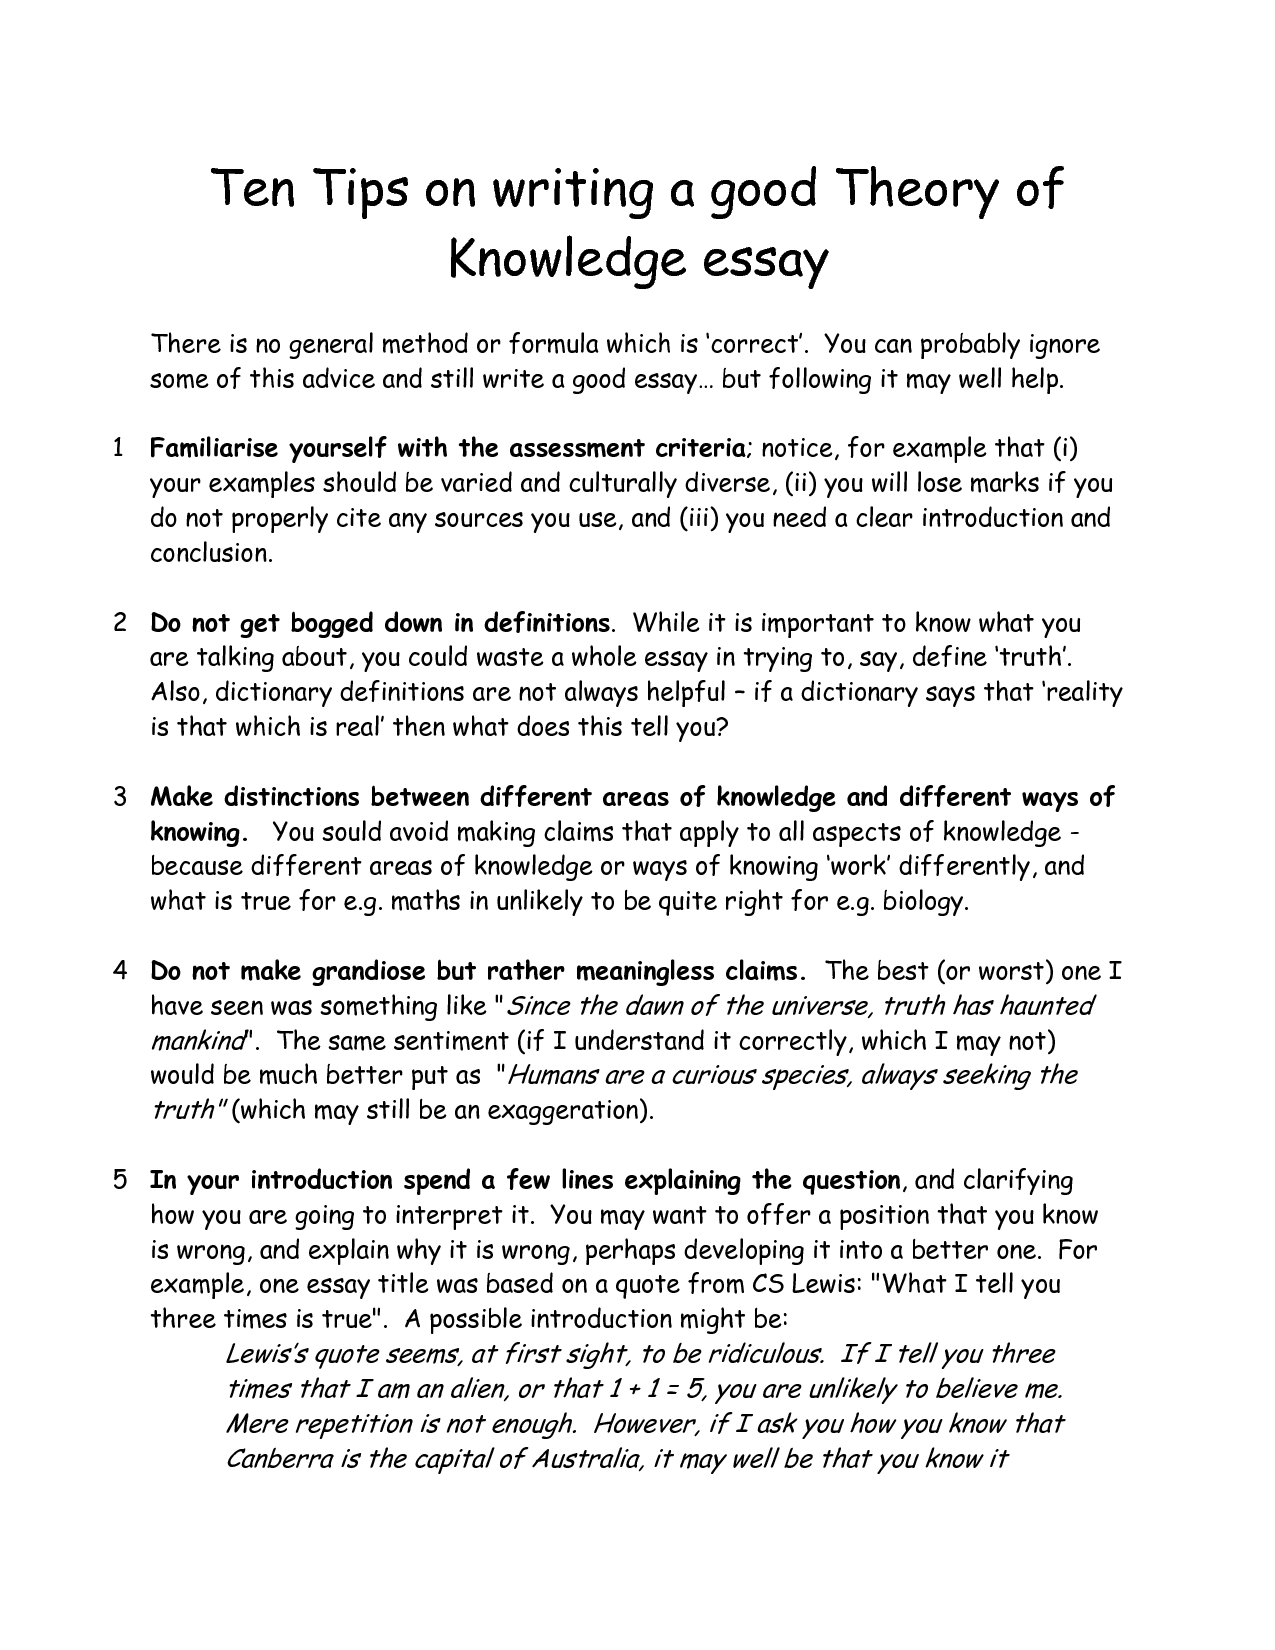 FREE 6+ Self-Introduction Essay Examples & Samples in PDF | DOC | Examples